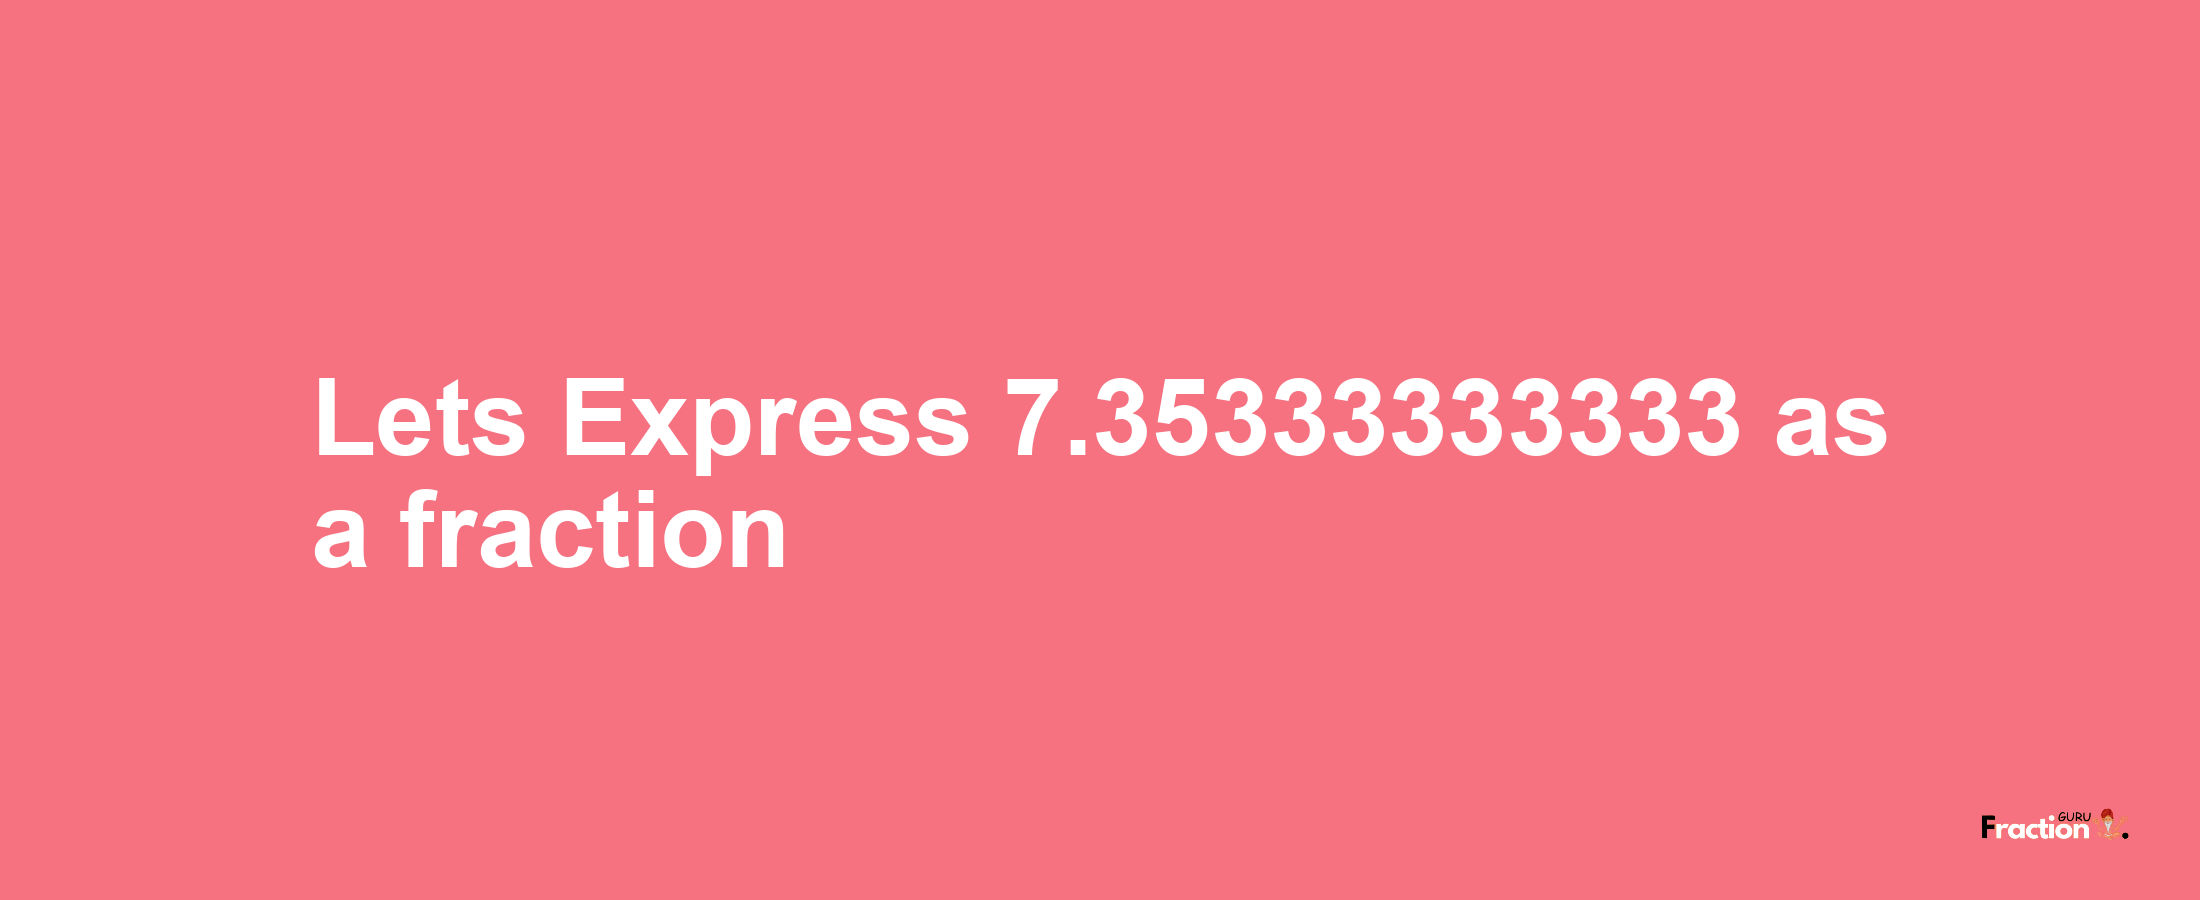 Lets Express 7.35333333333 as afraction